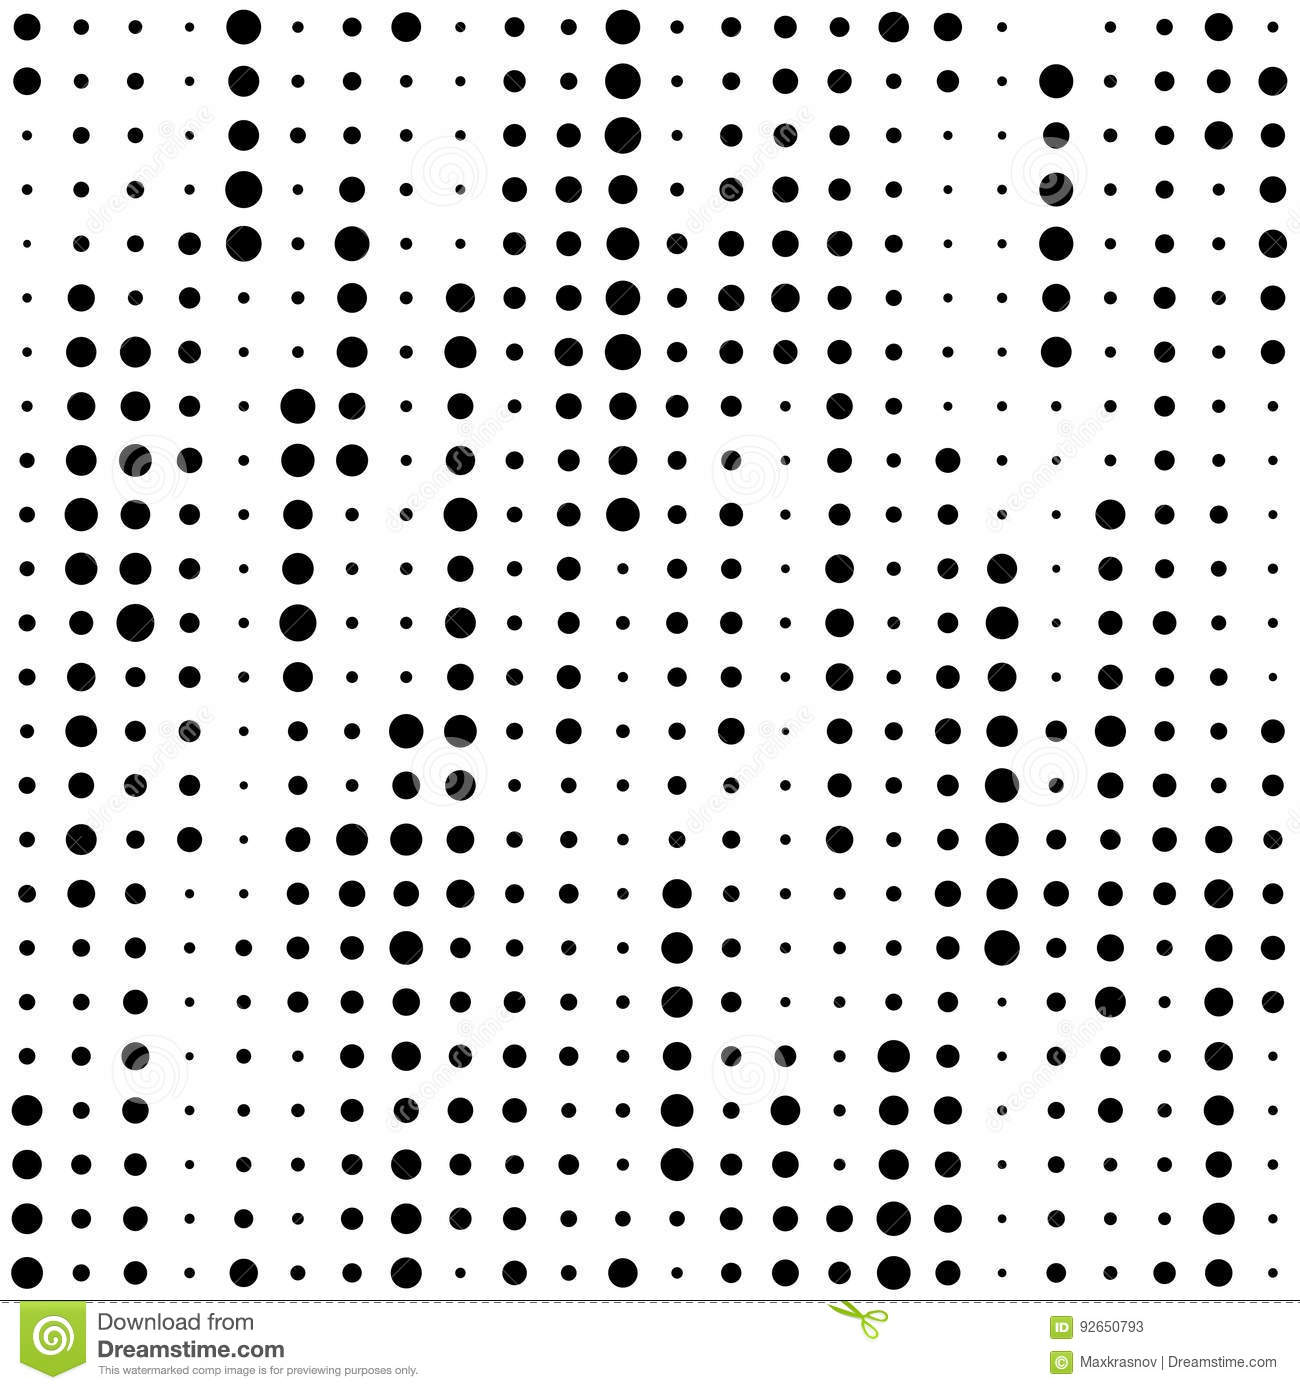 Modern Chaotic Dots Design - Skellig Word Search - HD Wallpaper 